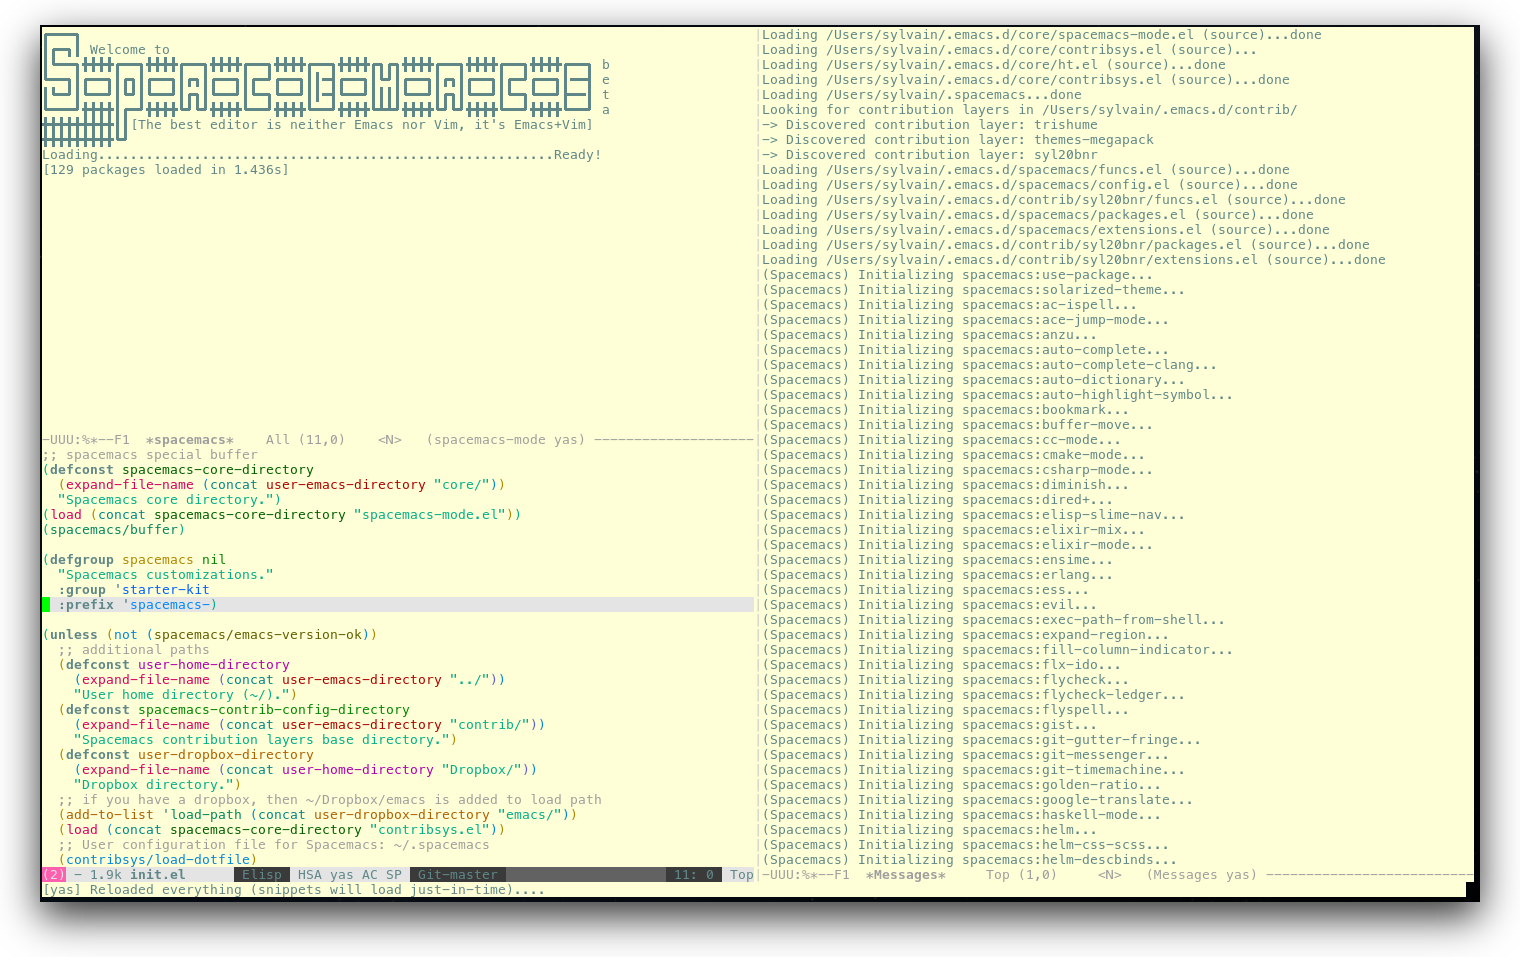 /TakeV/spacemacs/media/commit/ccb5ce55780fea43fb1208de41279a93112a3828/doc/img/spacemacs-urxvt.png